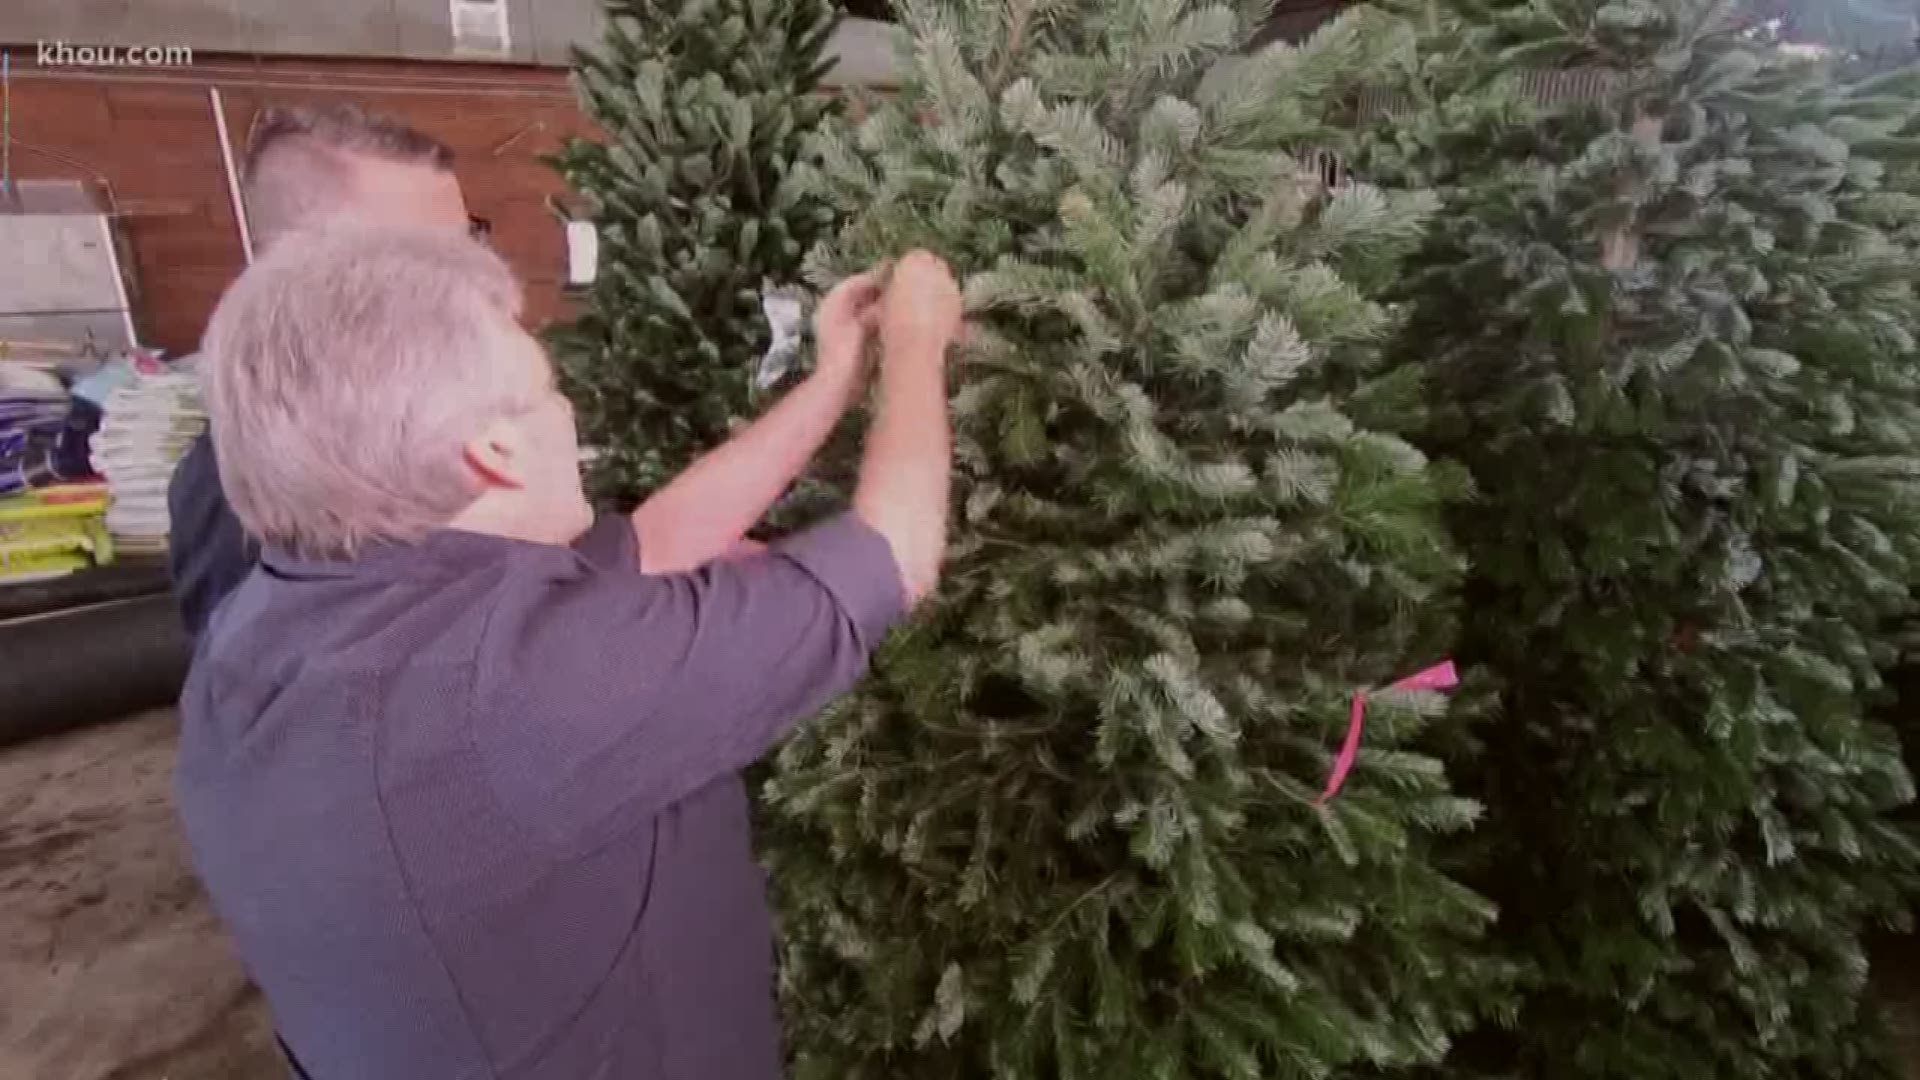 National Tree & Shrub owner Richard Devine shares tips on how to spot a bad Christmas tree and how to make your tree last through the holidays.